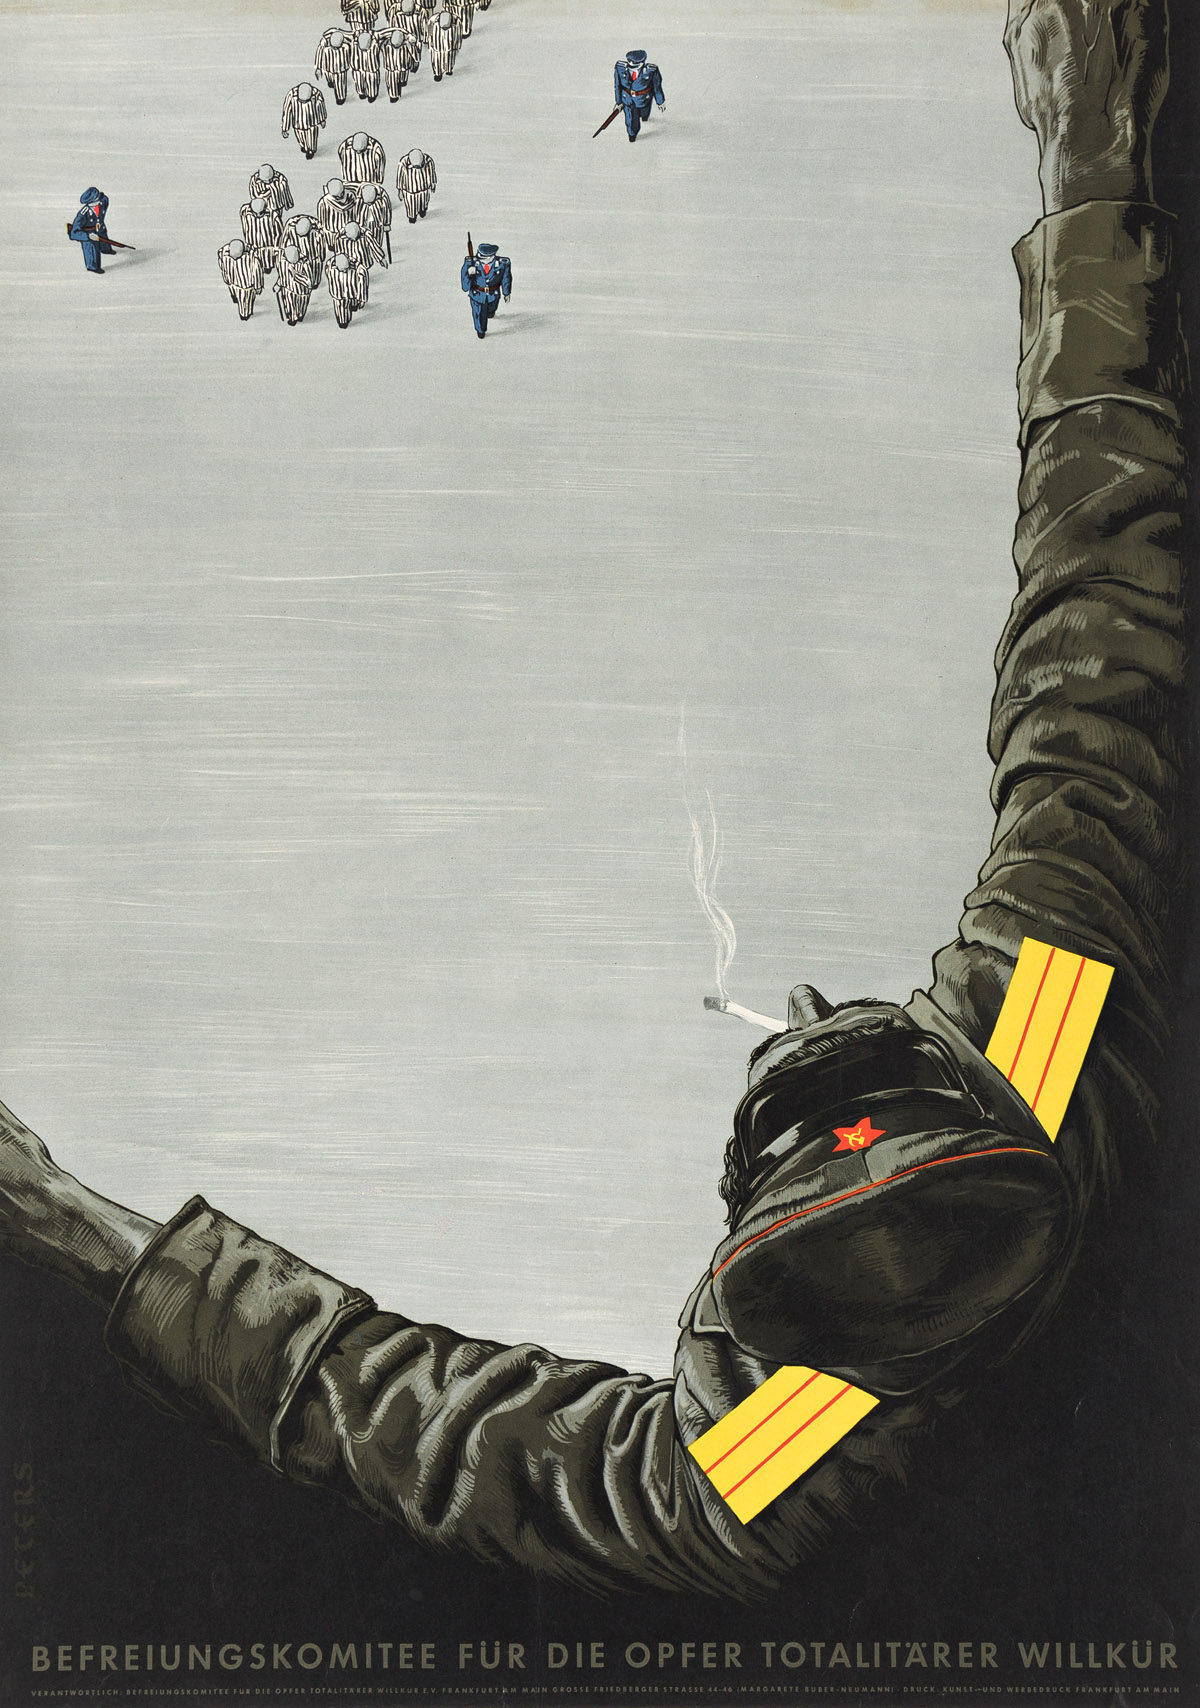 PETERS (DATES UNKNOWN).  [LIBERATION COMMITTEE FOR THE VICTIMS OF TOTALITARIAN TYRANNY]. Circa 1950. 33¼x23½ inches, 84½x59¾ cm. Kunst